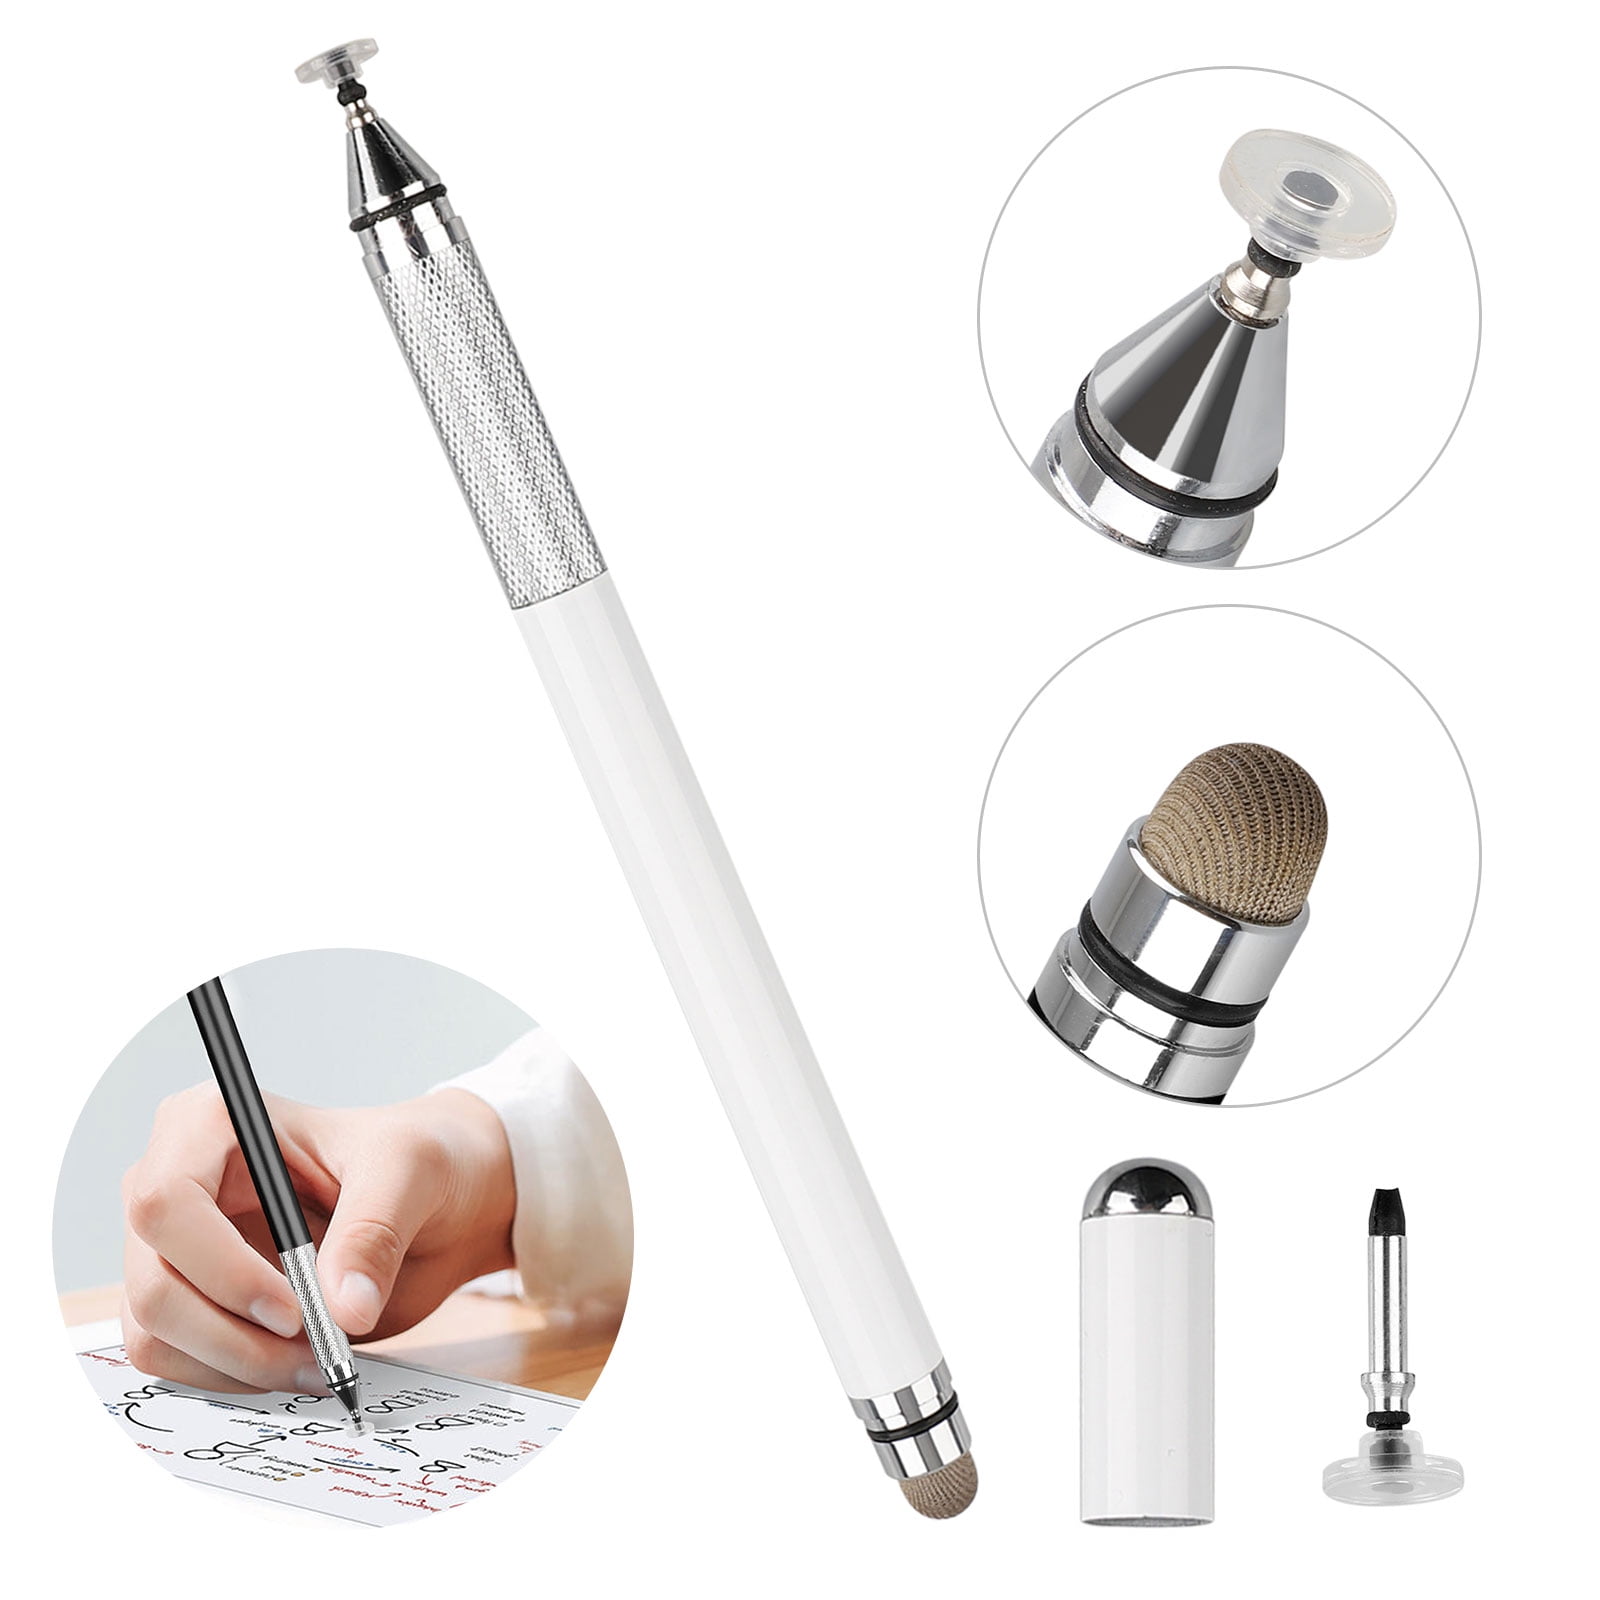 Sensitive Rechargeable Touch Screen Stylus Pen for iPhone iPad iPod Samsung PC 